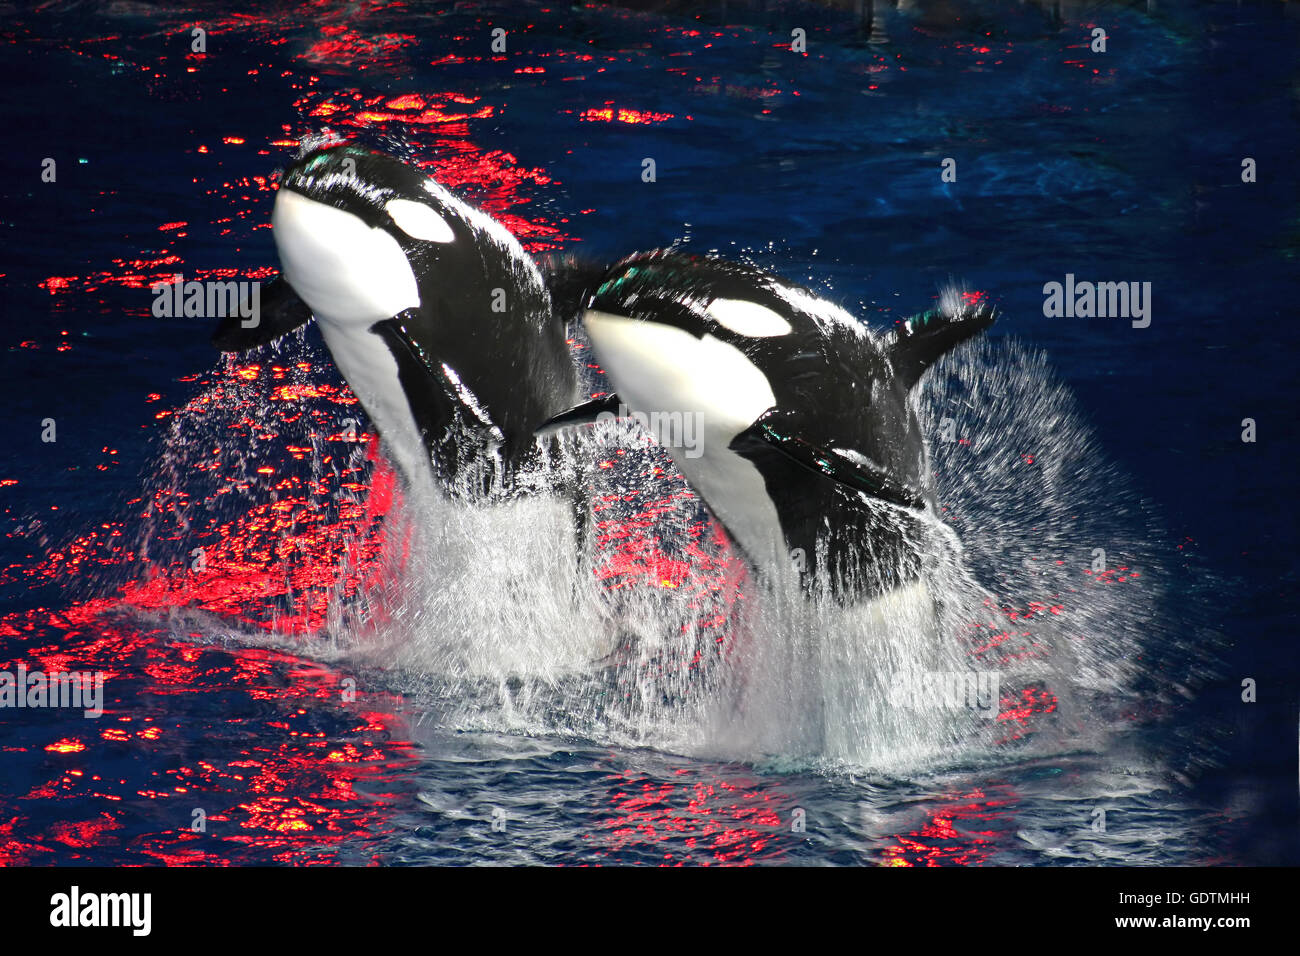 2 Killer Whales jumping in the air at night with bright red light. Stock Photo